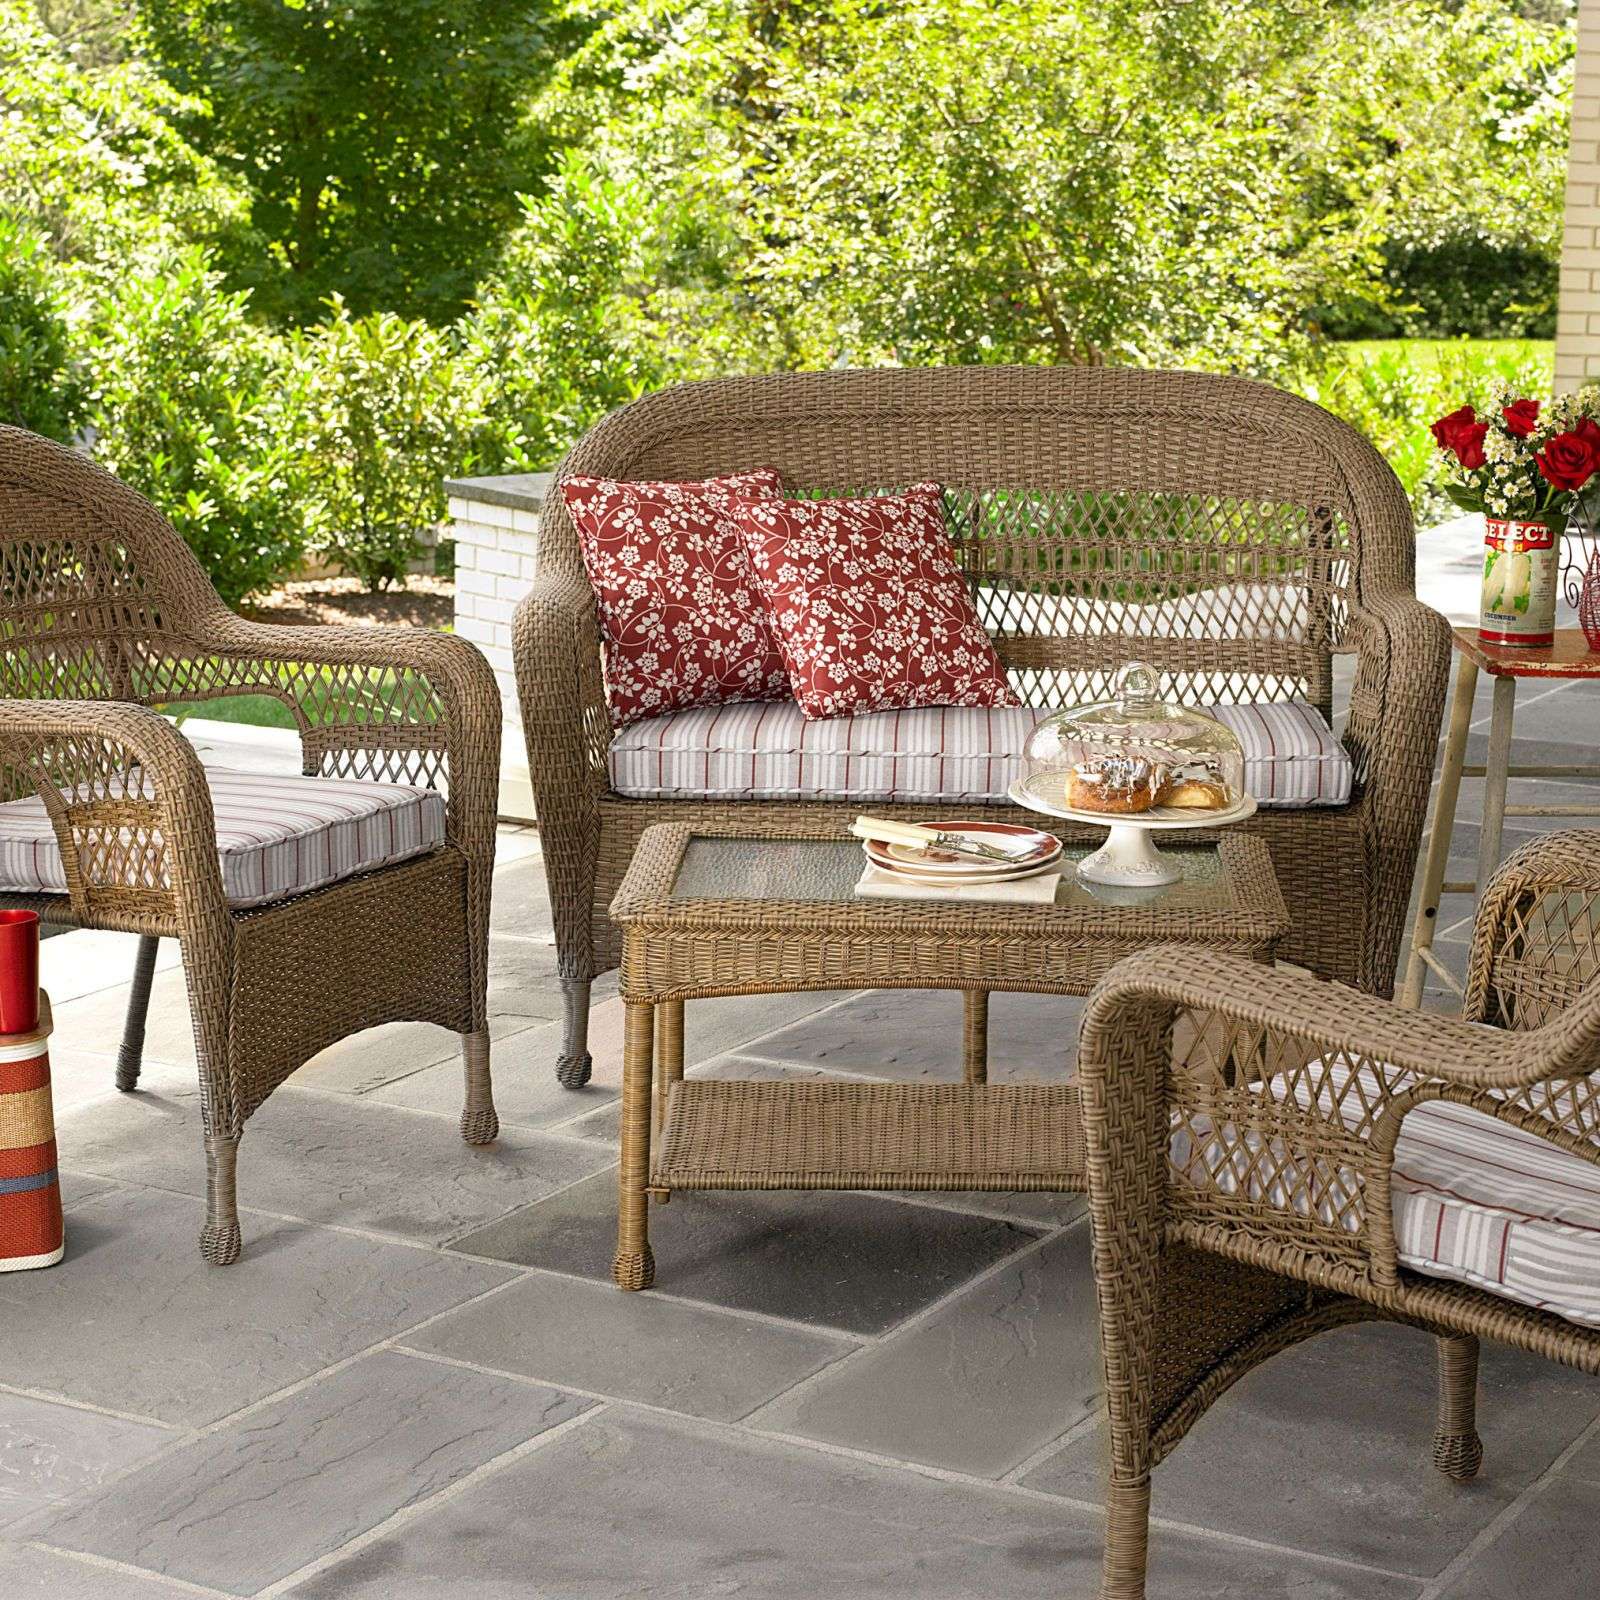 How to Get Your Patio Ready for Summer